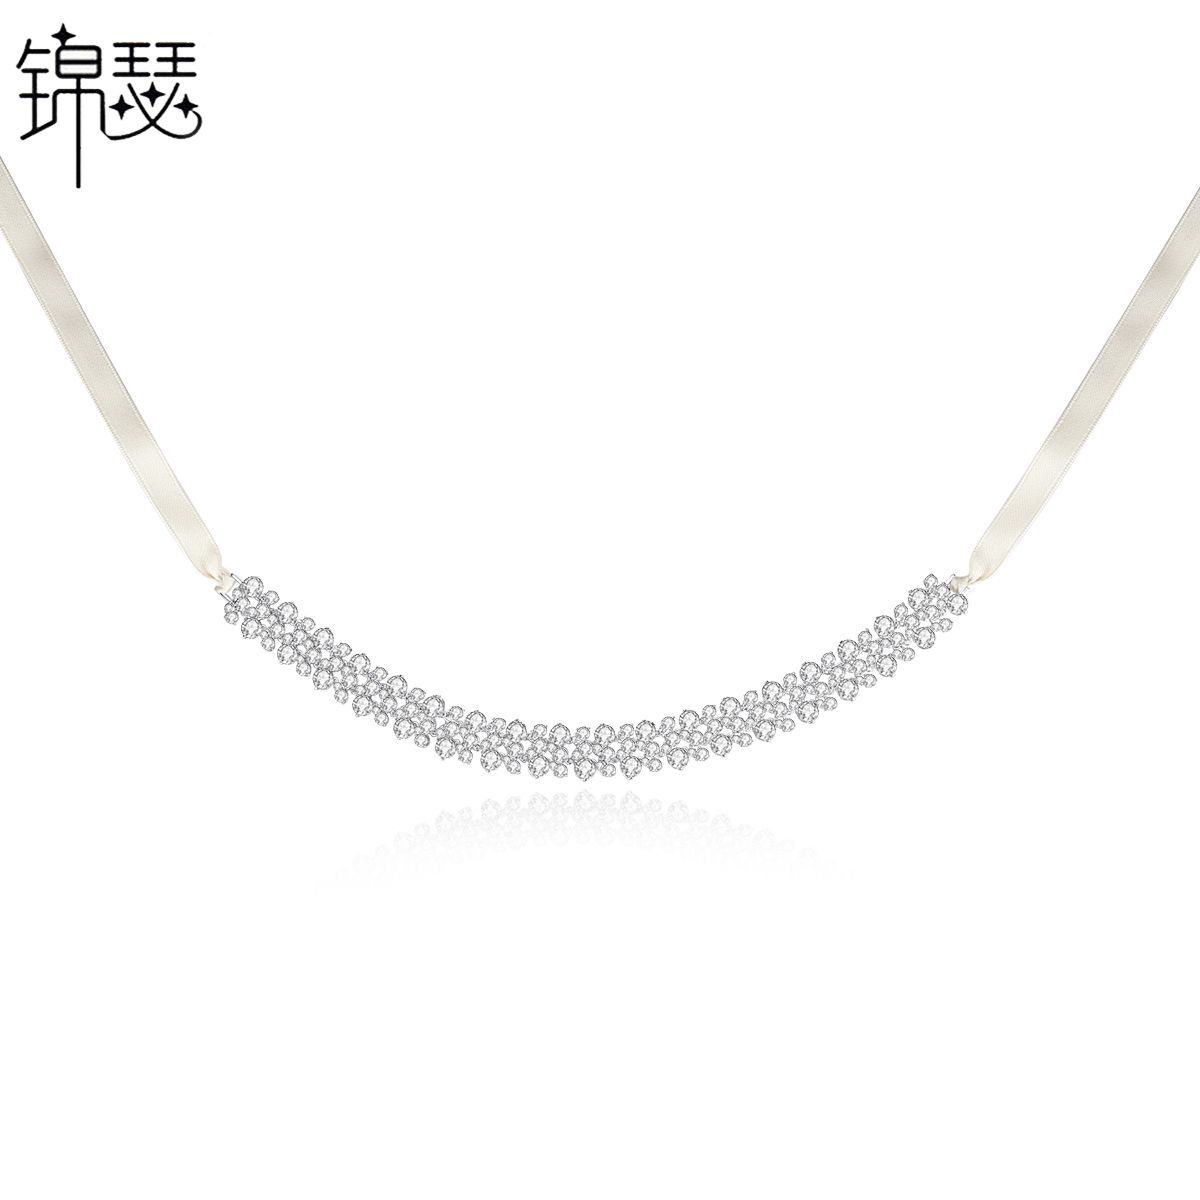 European style clavicle necklace white accessories for women